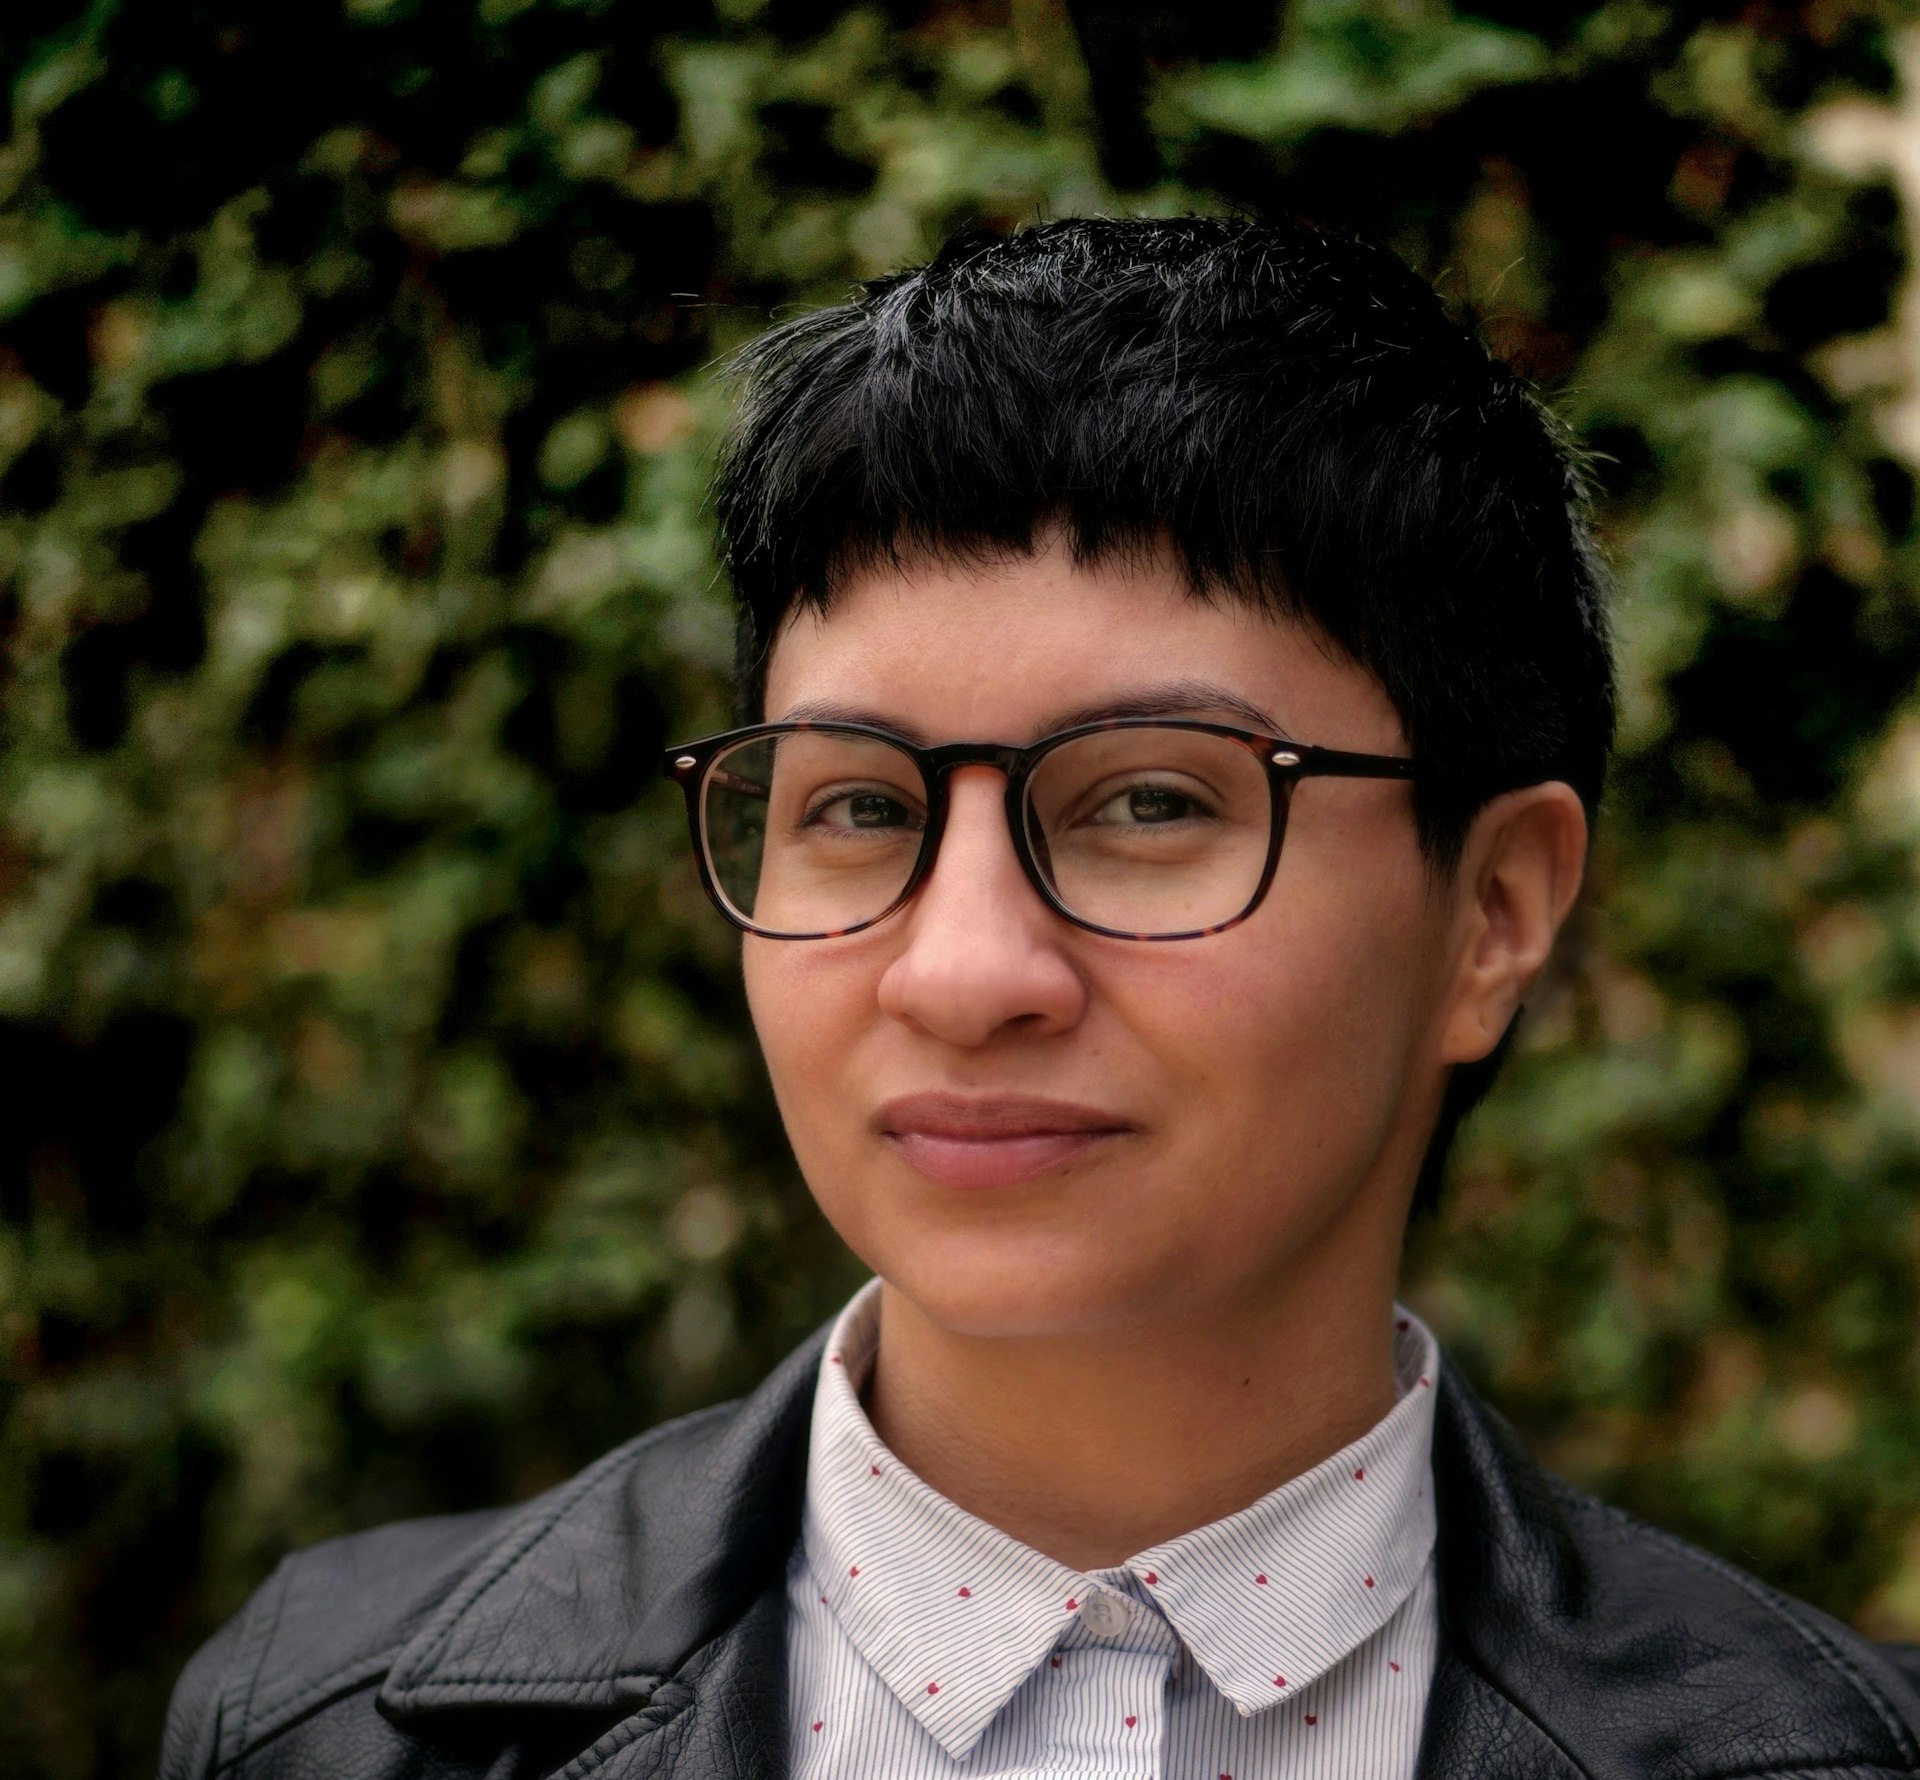 A gender/queer Latinx person of Native and white descent, wearing black-rimmed glasses, smiles for the camera